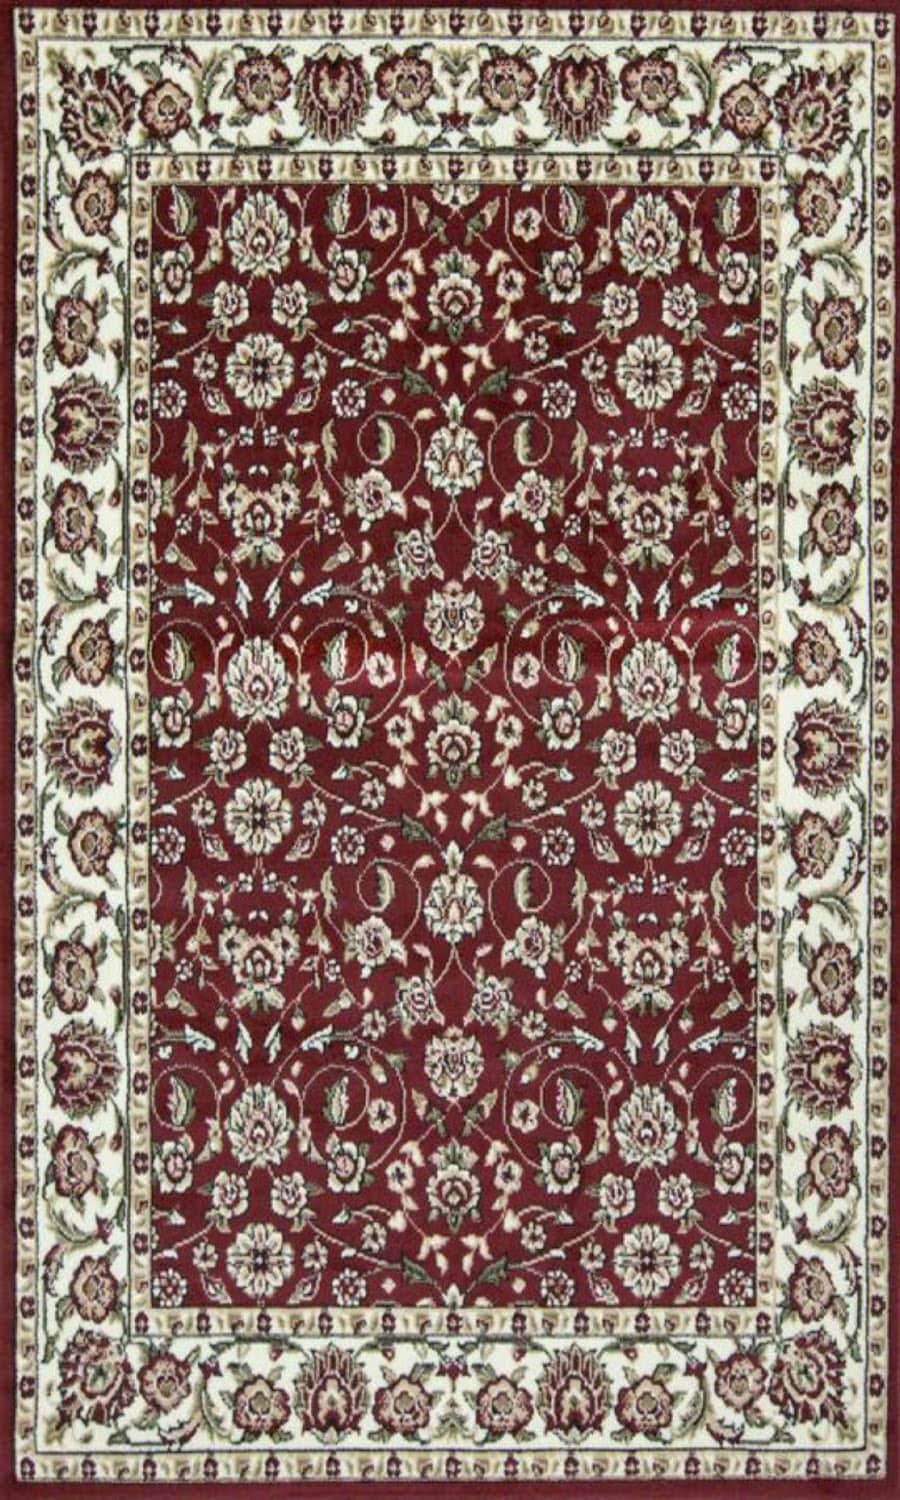 Sun Ray Outline Red Area Rug Nairobi 1162 - Context USA - Area Rug by MSRUGS